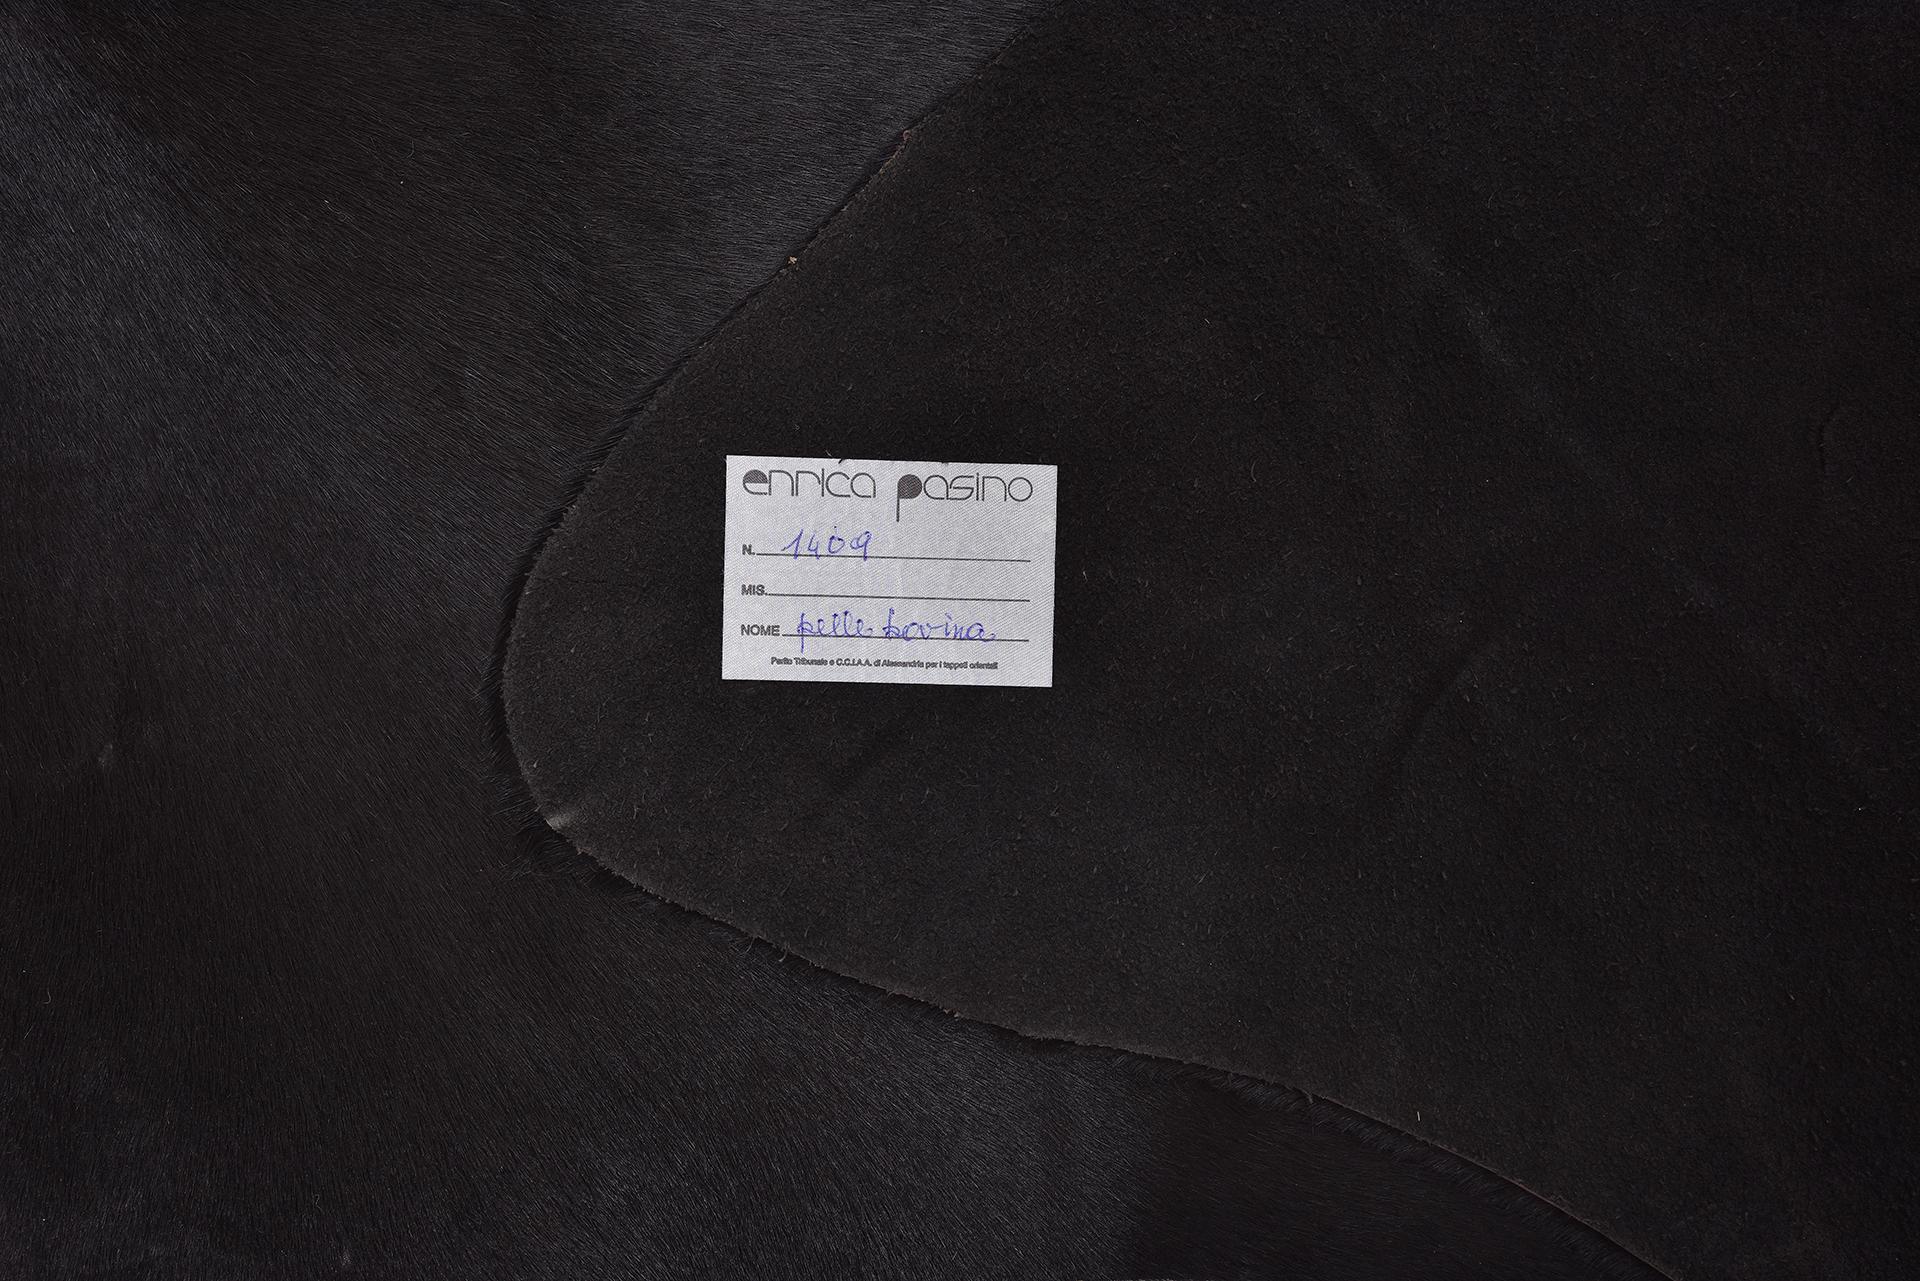 nr. 1409  - Black leather with edges without waviness, so it adhere perfectly to the floor. Naturally elegant, it fits everywhere.
Now with an interesting price because I'm closing my activities.